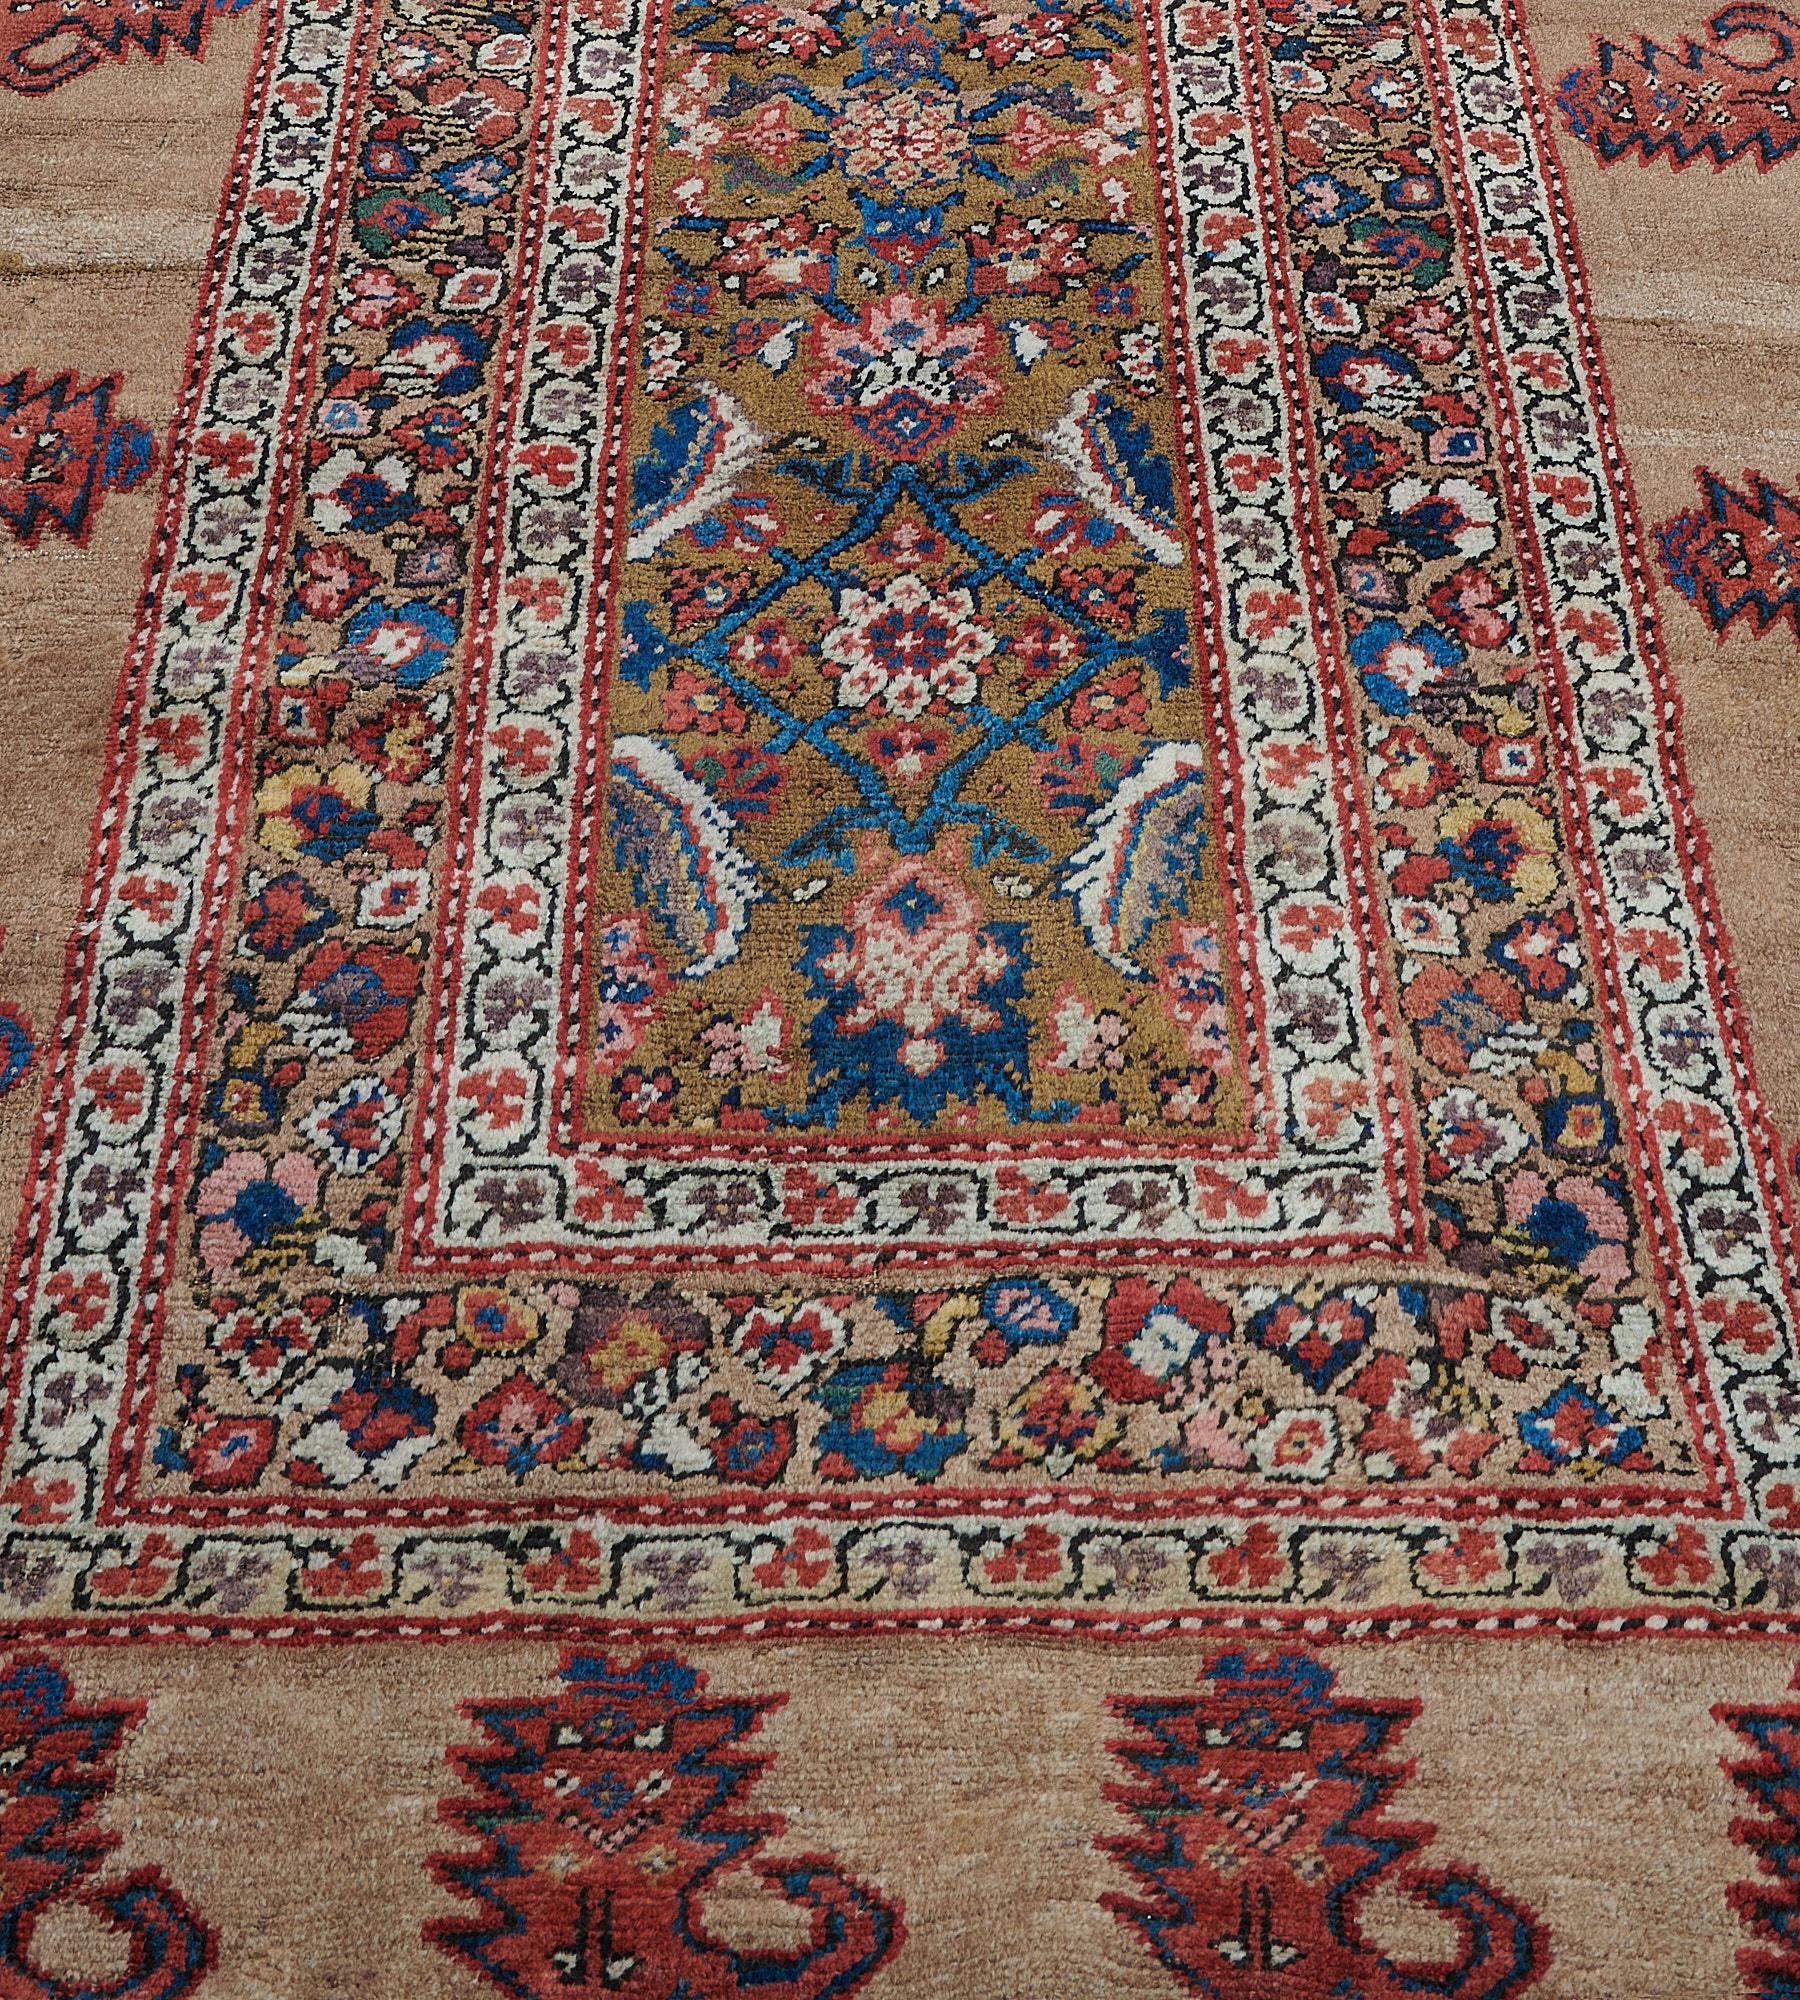 Antique Circa-1900 Herati-pattern Persian Serab Runner In Good Condition For Sale In West Hollywood, CA